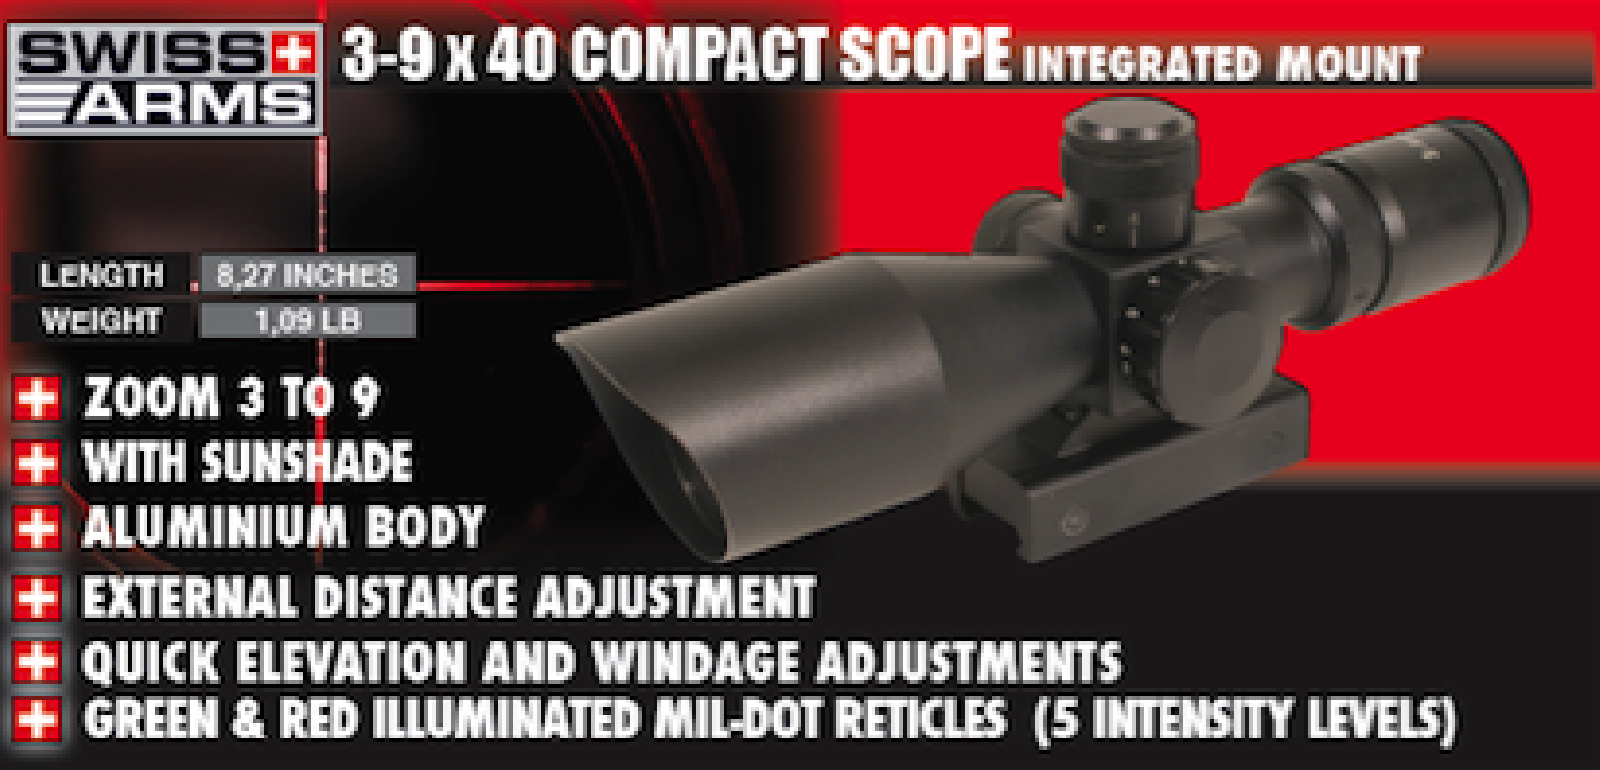 SWISS ARMS Scope Compact 3-9 X 40 Integrated Protection from Sun/C24-6